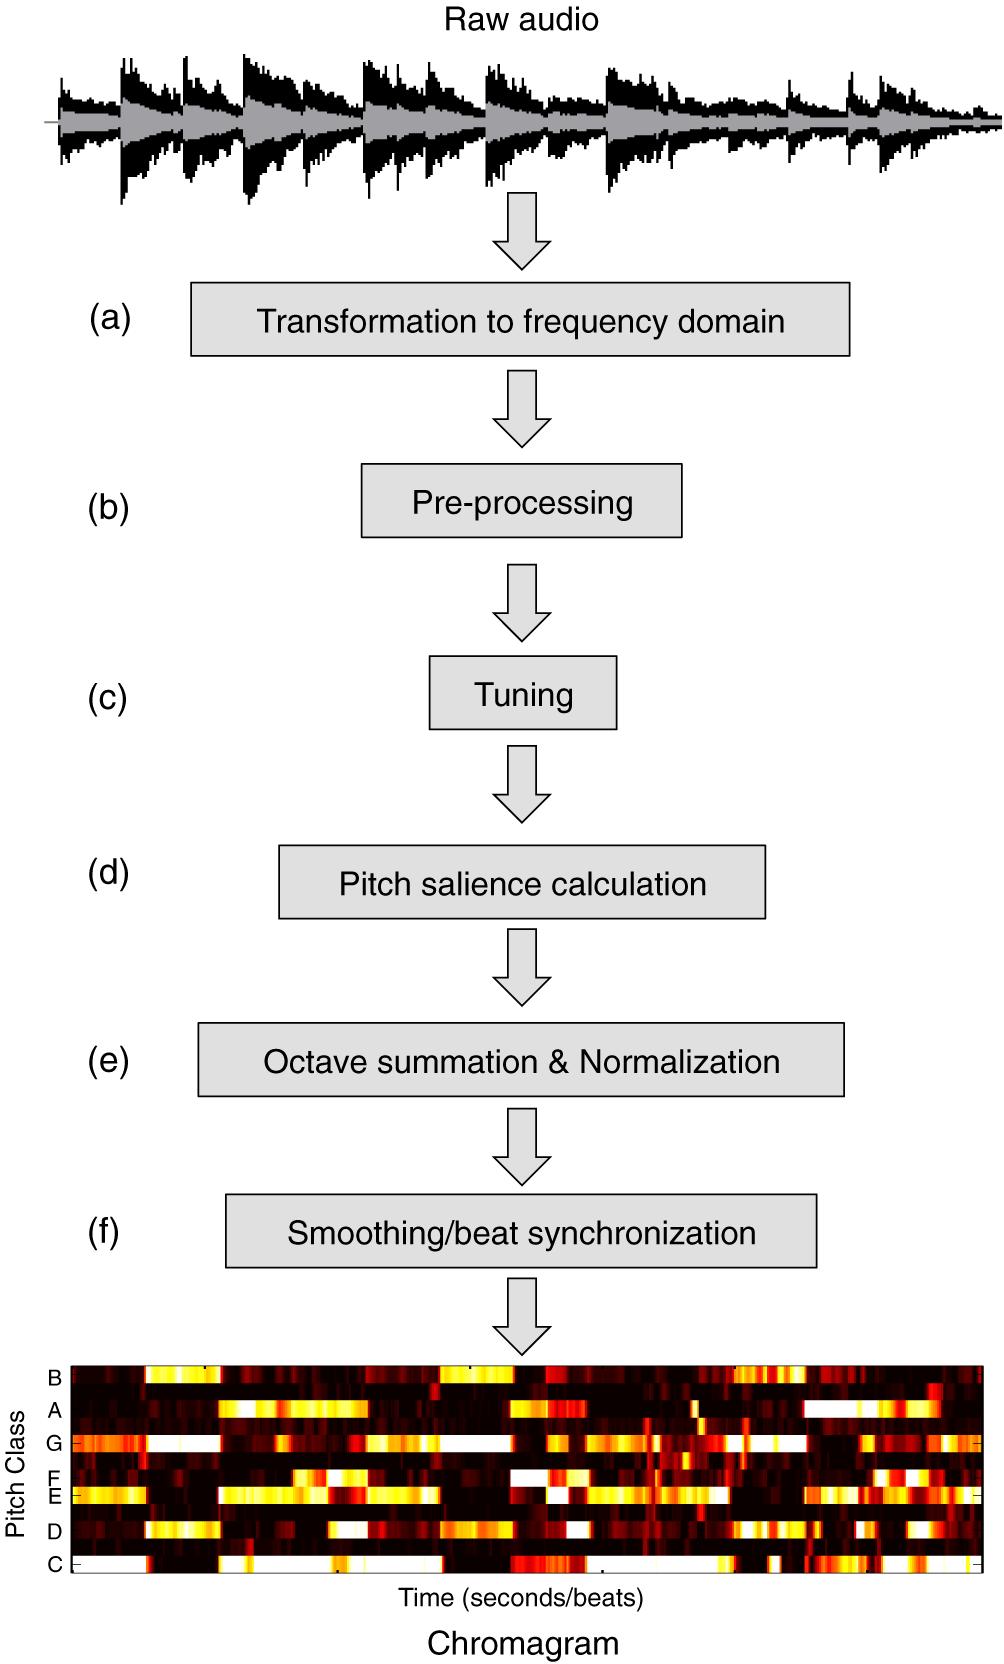 4 IEEE/ACM TRANSACTIONS ON AUDIO, SPEECH, AND LANGUAGE PROCESSING, VOL. 22, NO. 2, FEBRUARY 2014 Fig. 4. Common steps to convert a digital audio le into its chromagram representation.